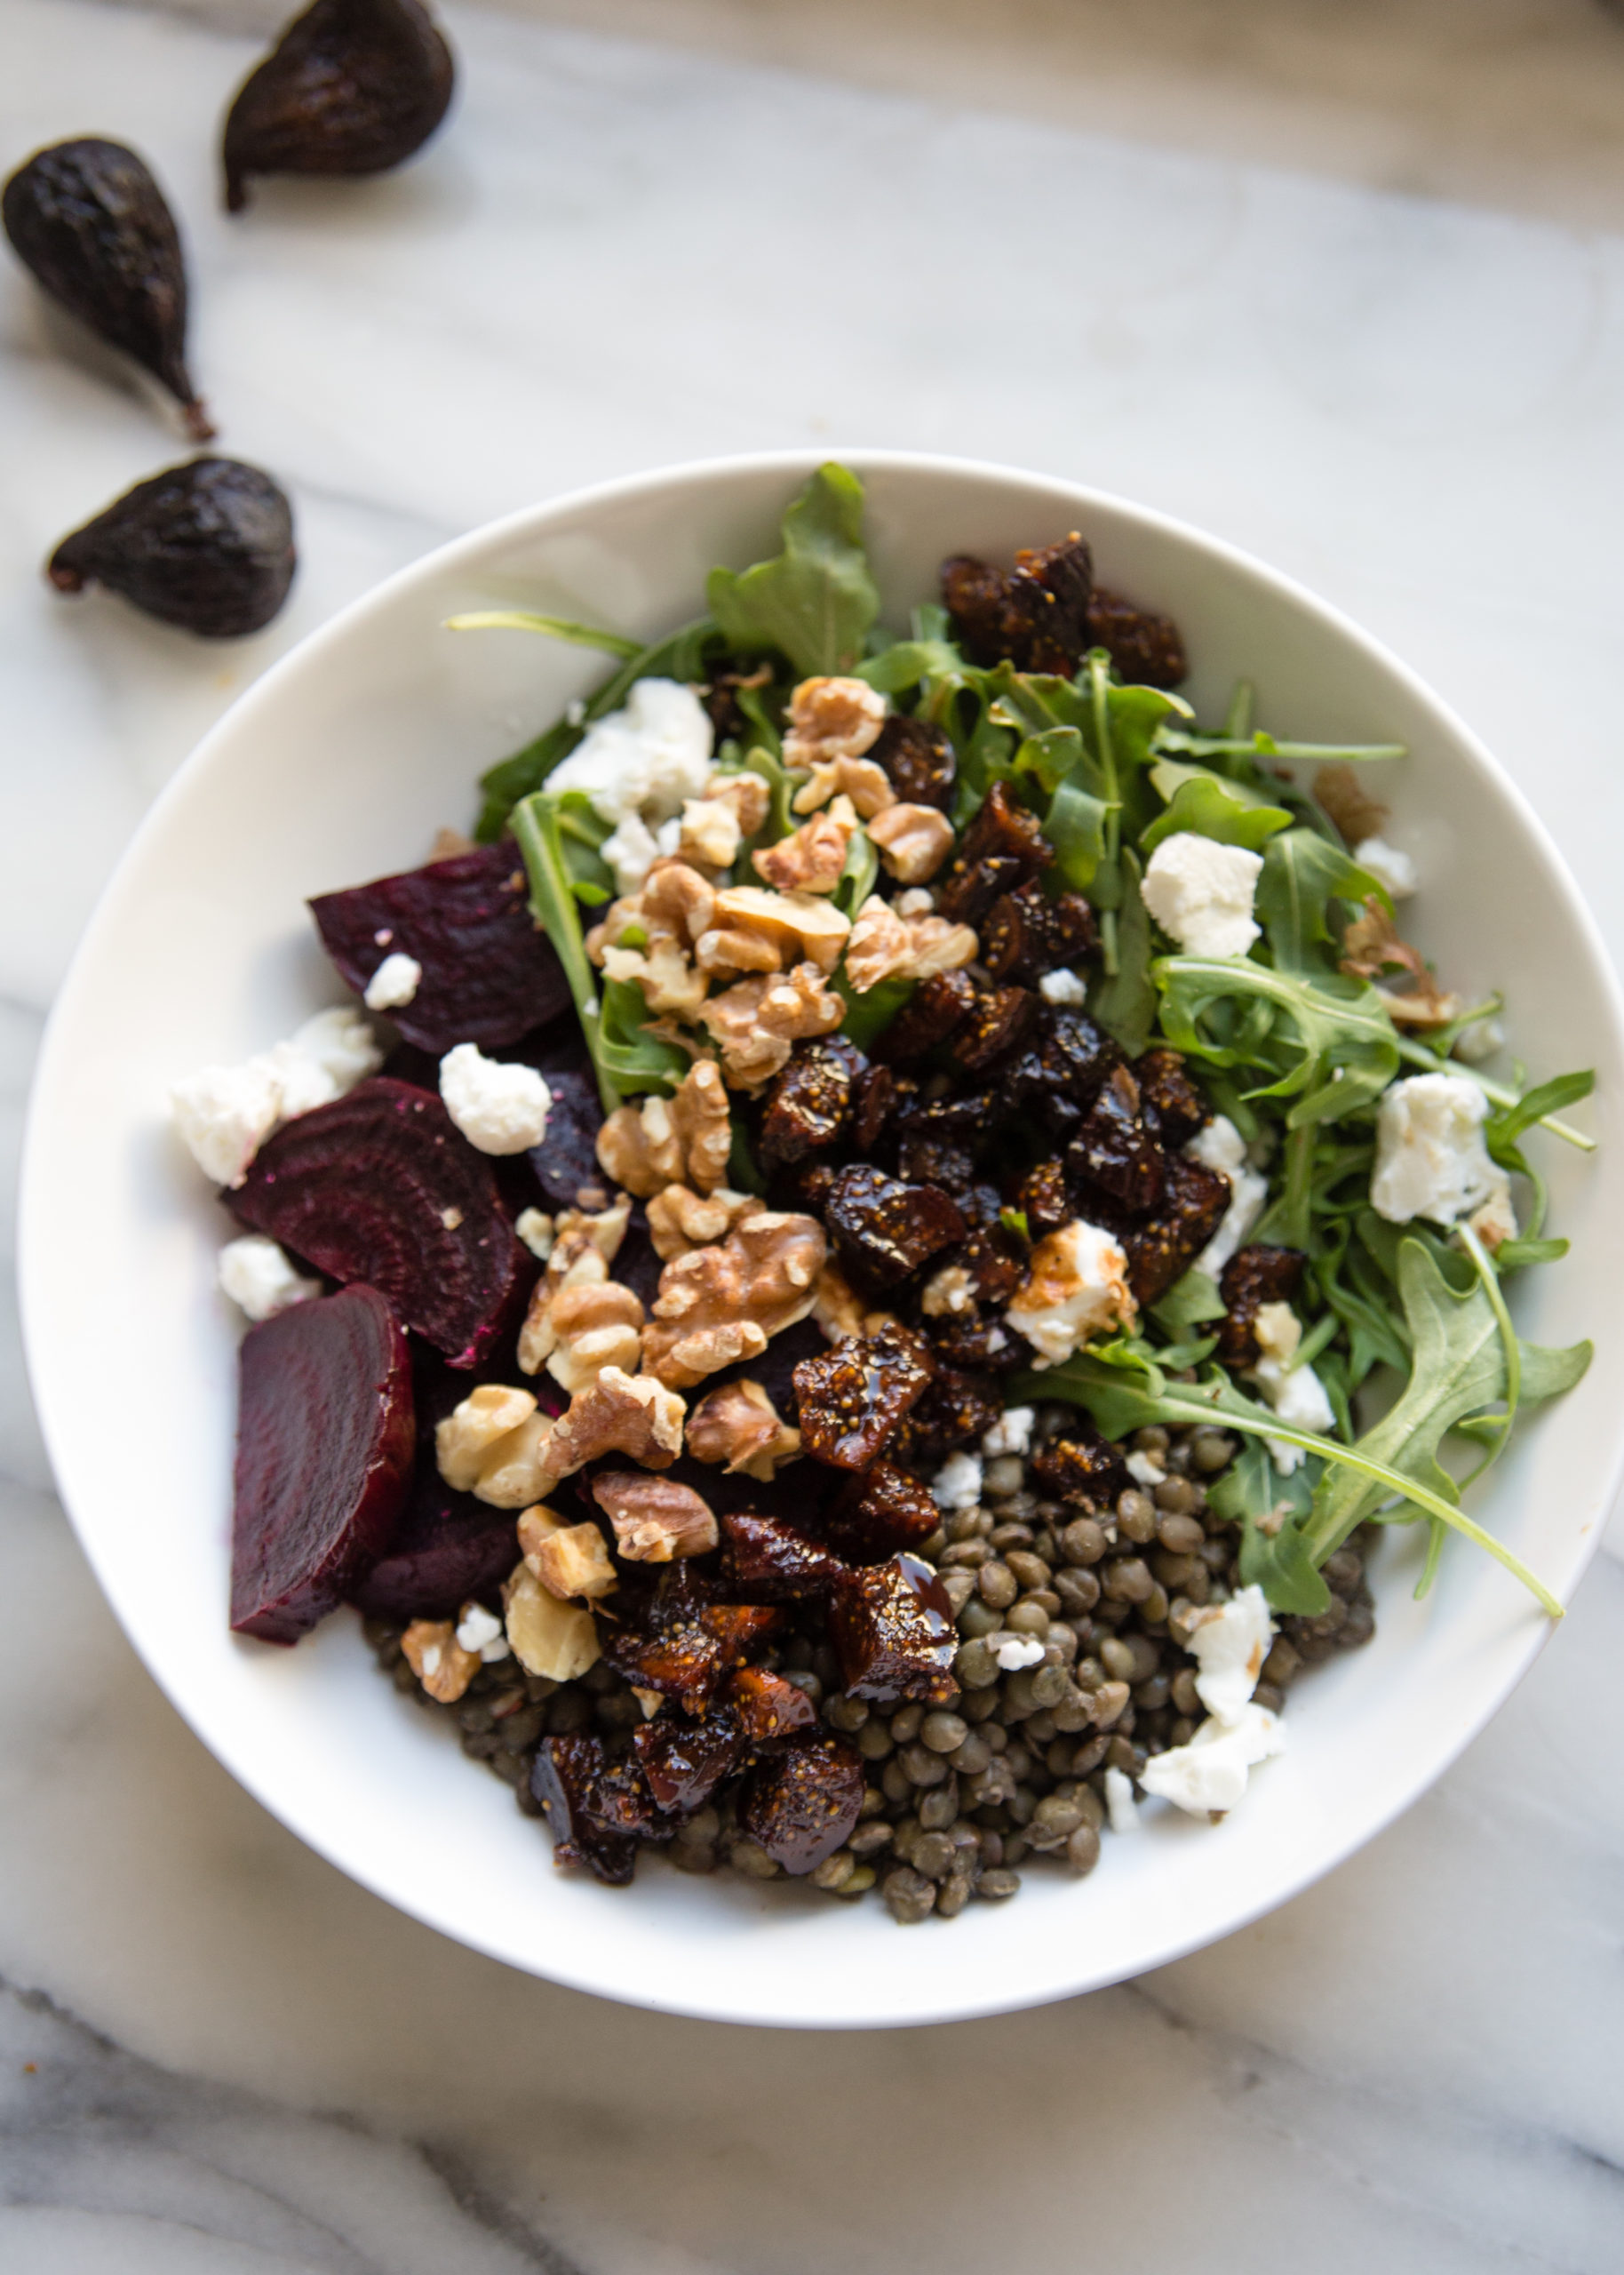 Warm Lentil Salad with Beets + Balsamic Figs - Valley Fig Growers